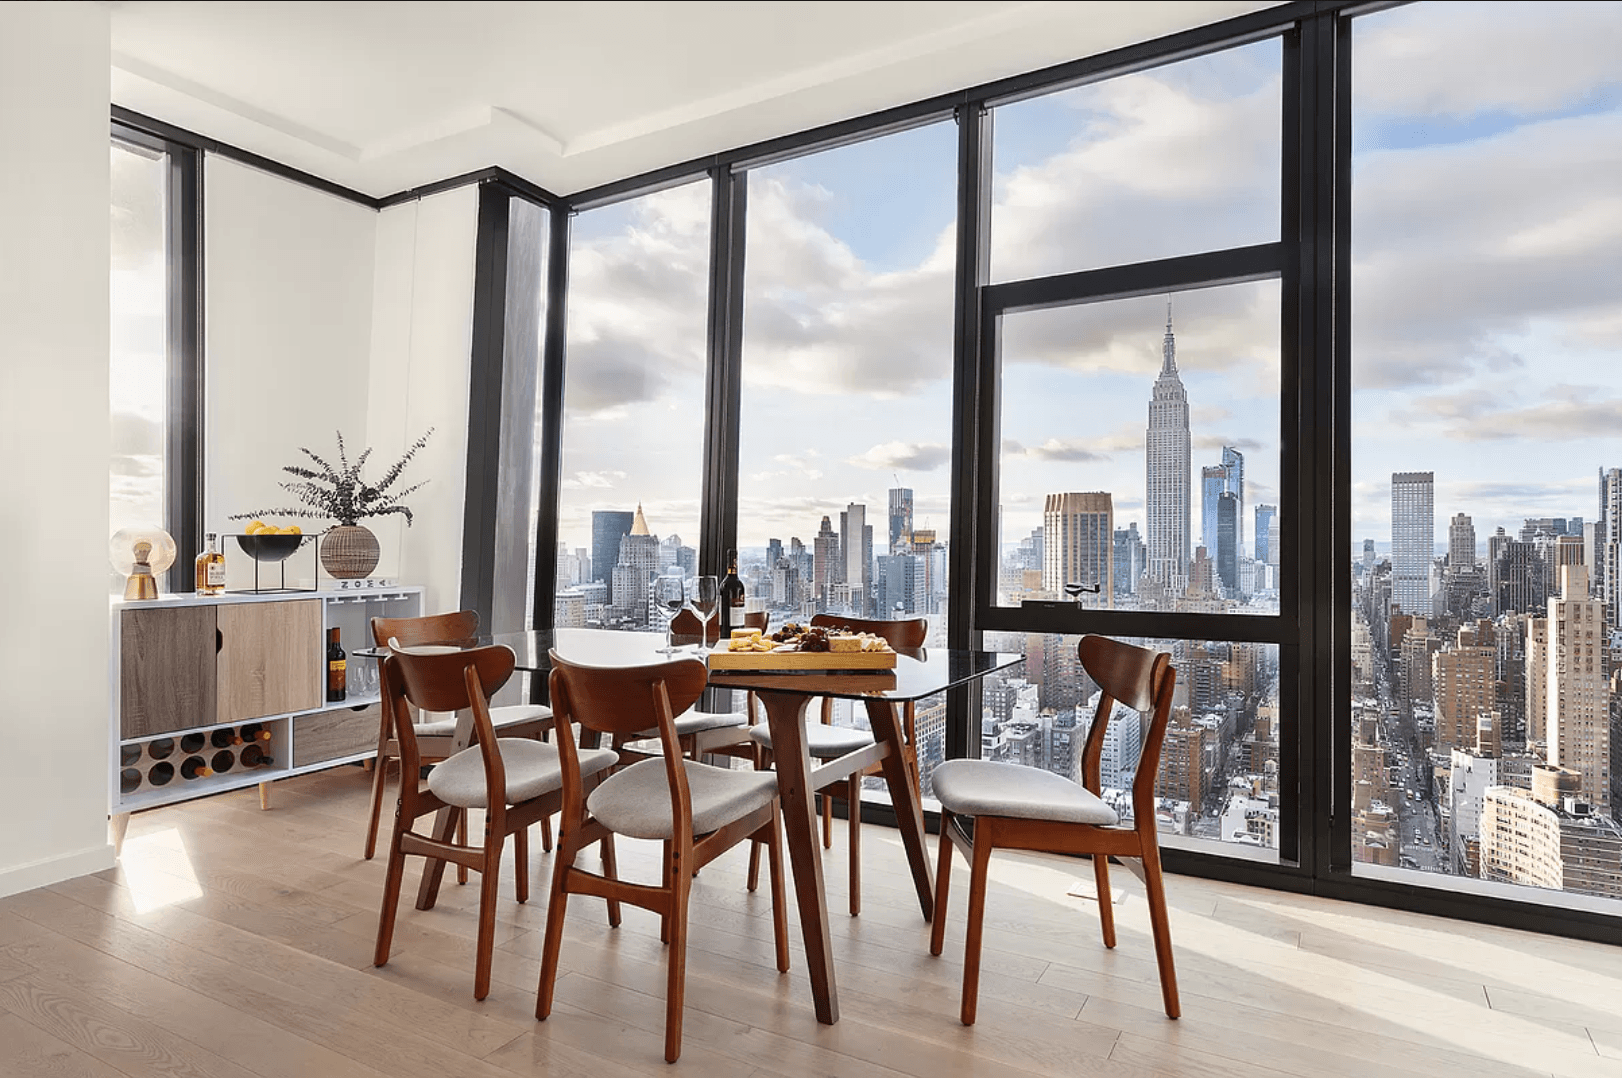 NO FEE! Open and Windowed 2 Bed 2.5 Bath with East River and Skyline Views